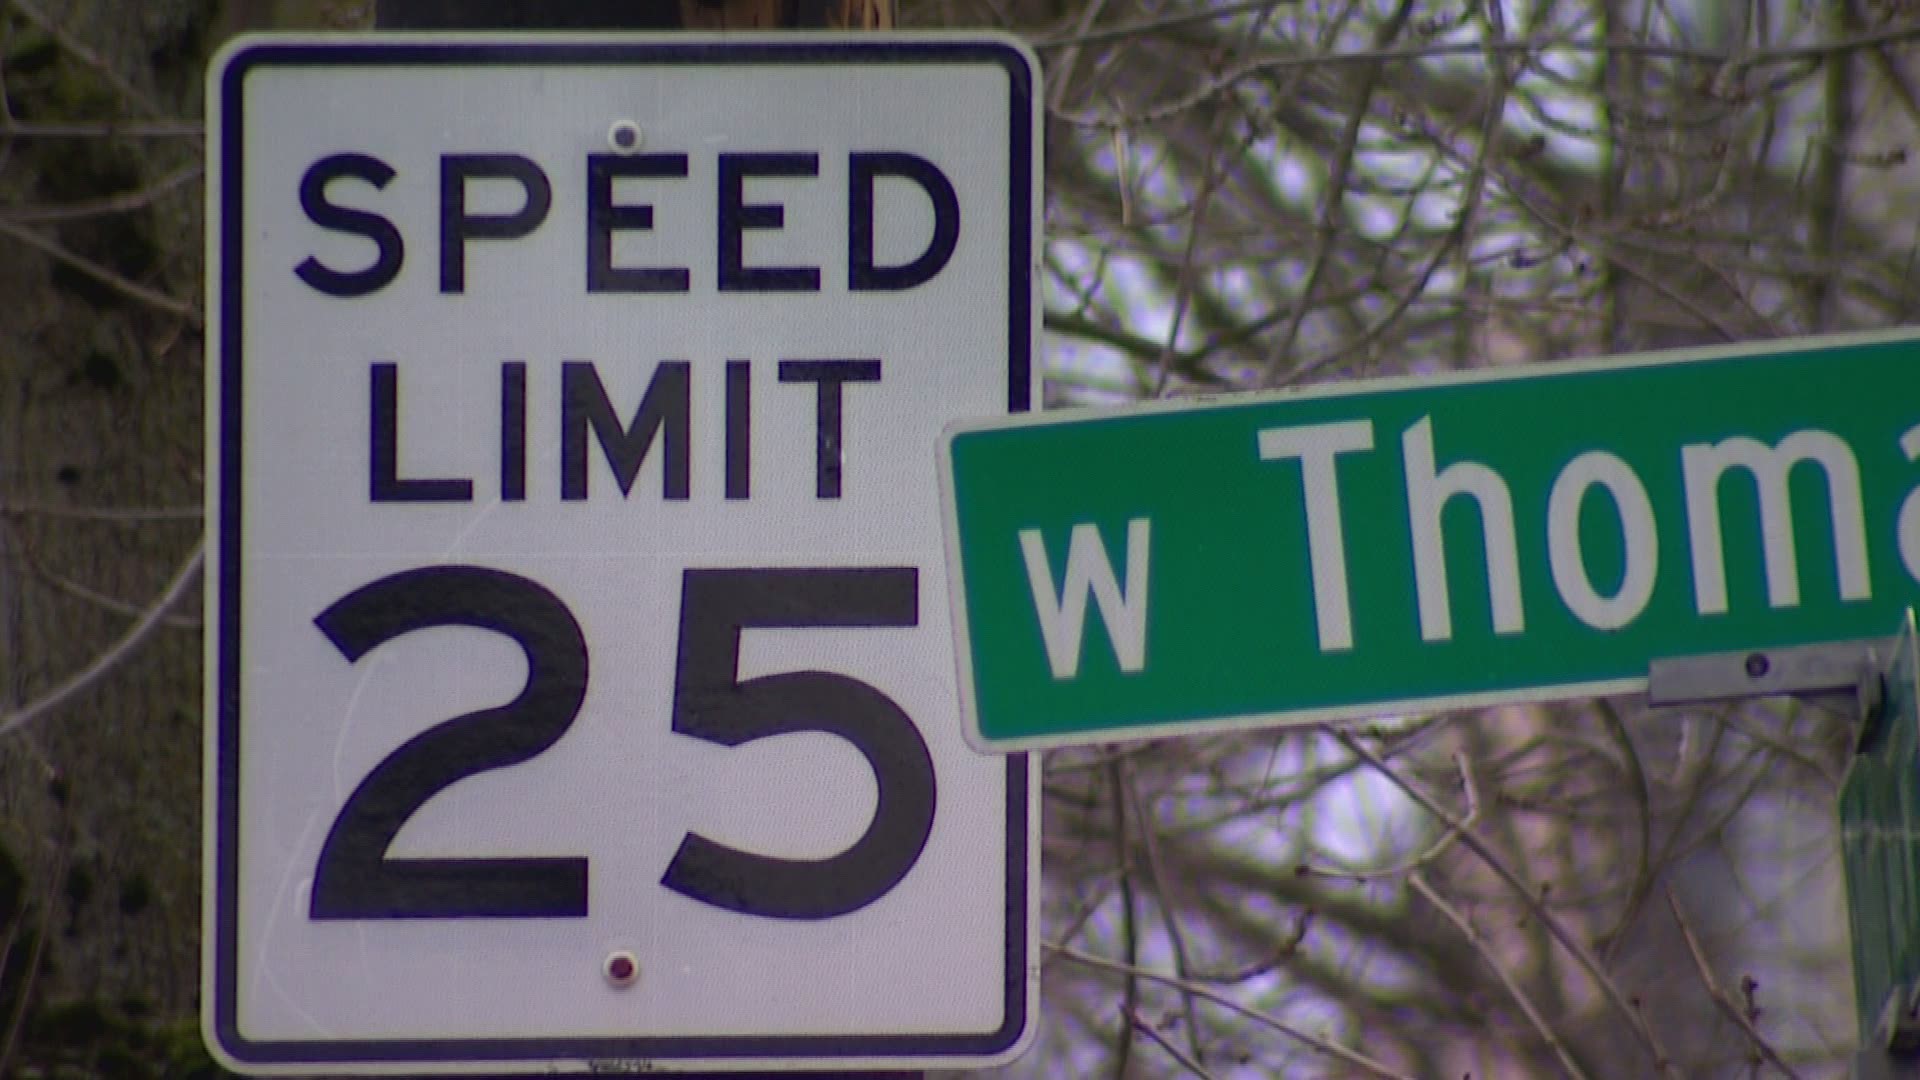 Since December 2019, SDOT has been lowering speed limits to 25 mph on hundreds of miles of city streets.